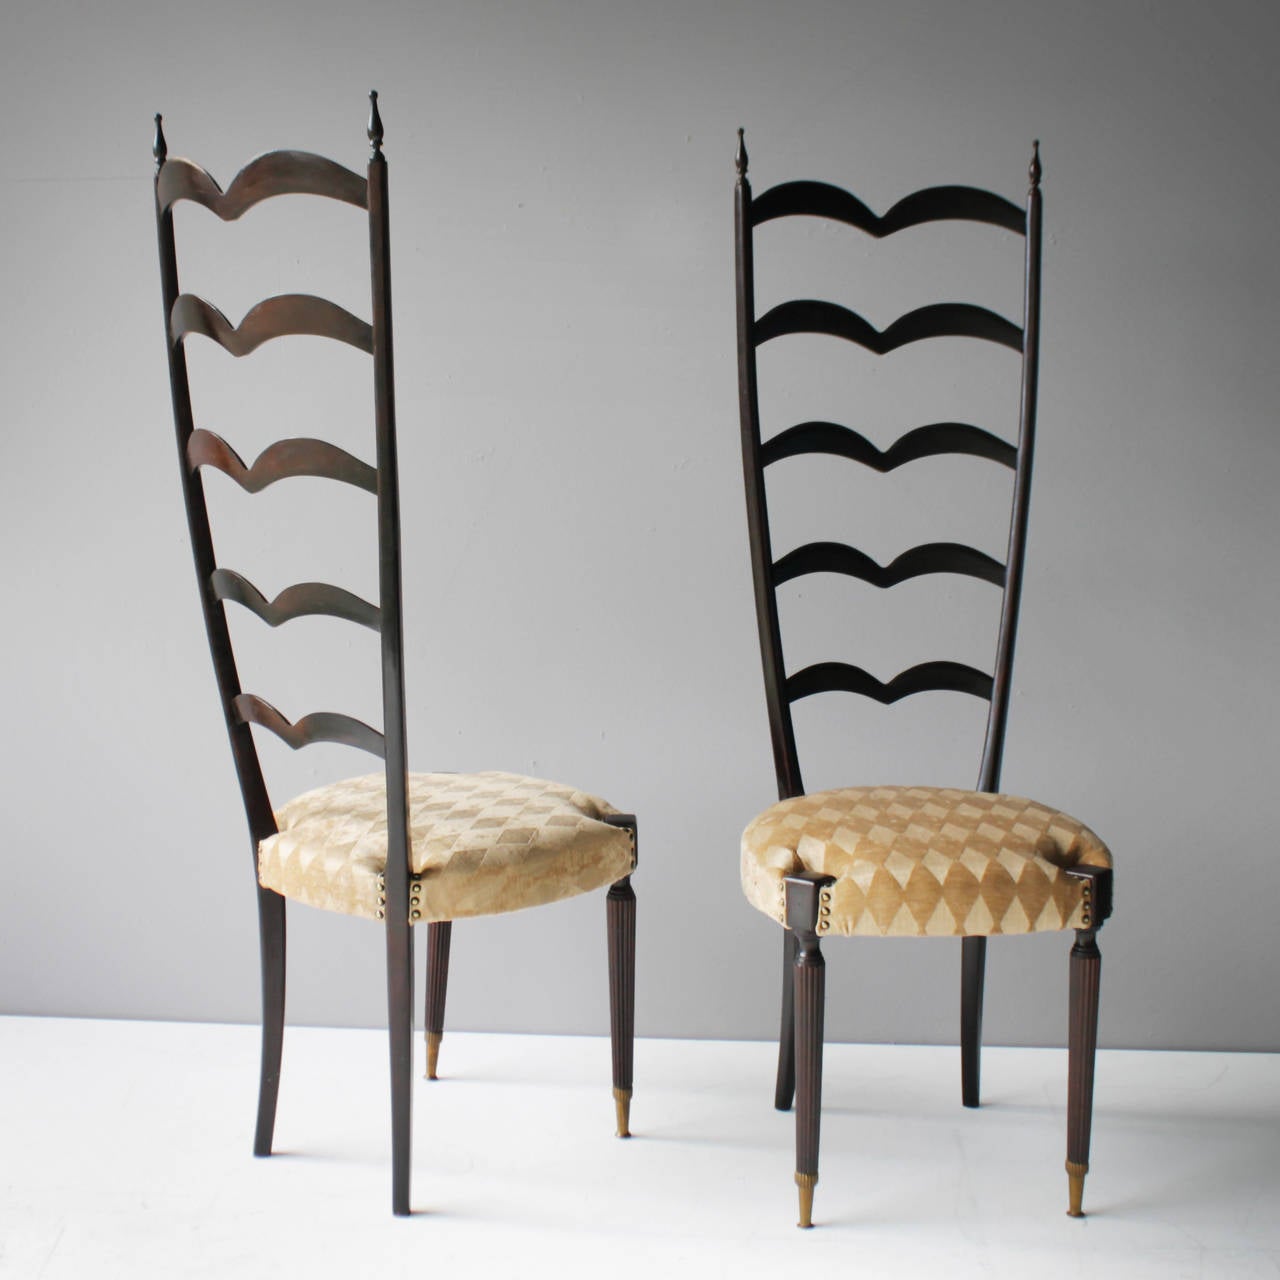 Italian Pair of Highly Decorative Ladder Back Chairs by Paolo Buffa